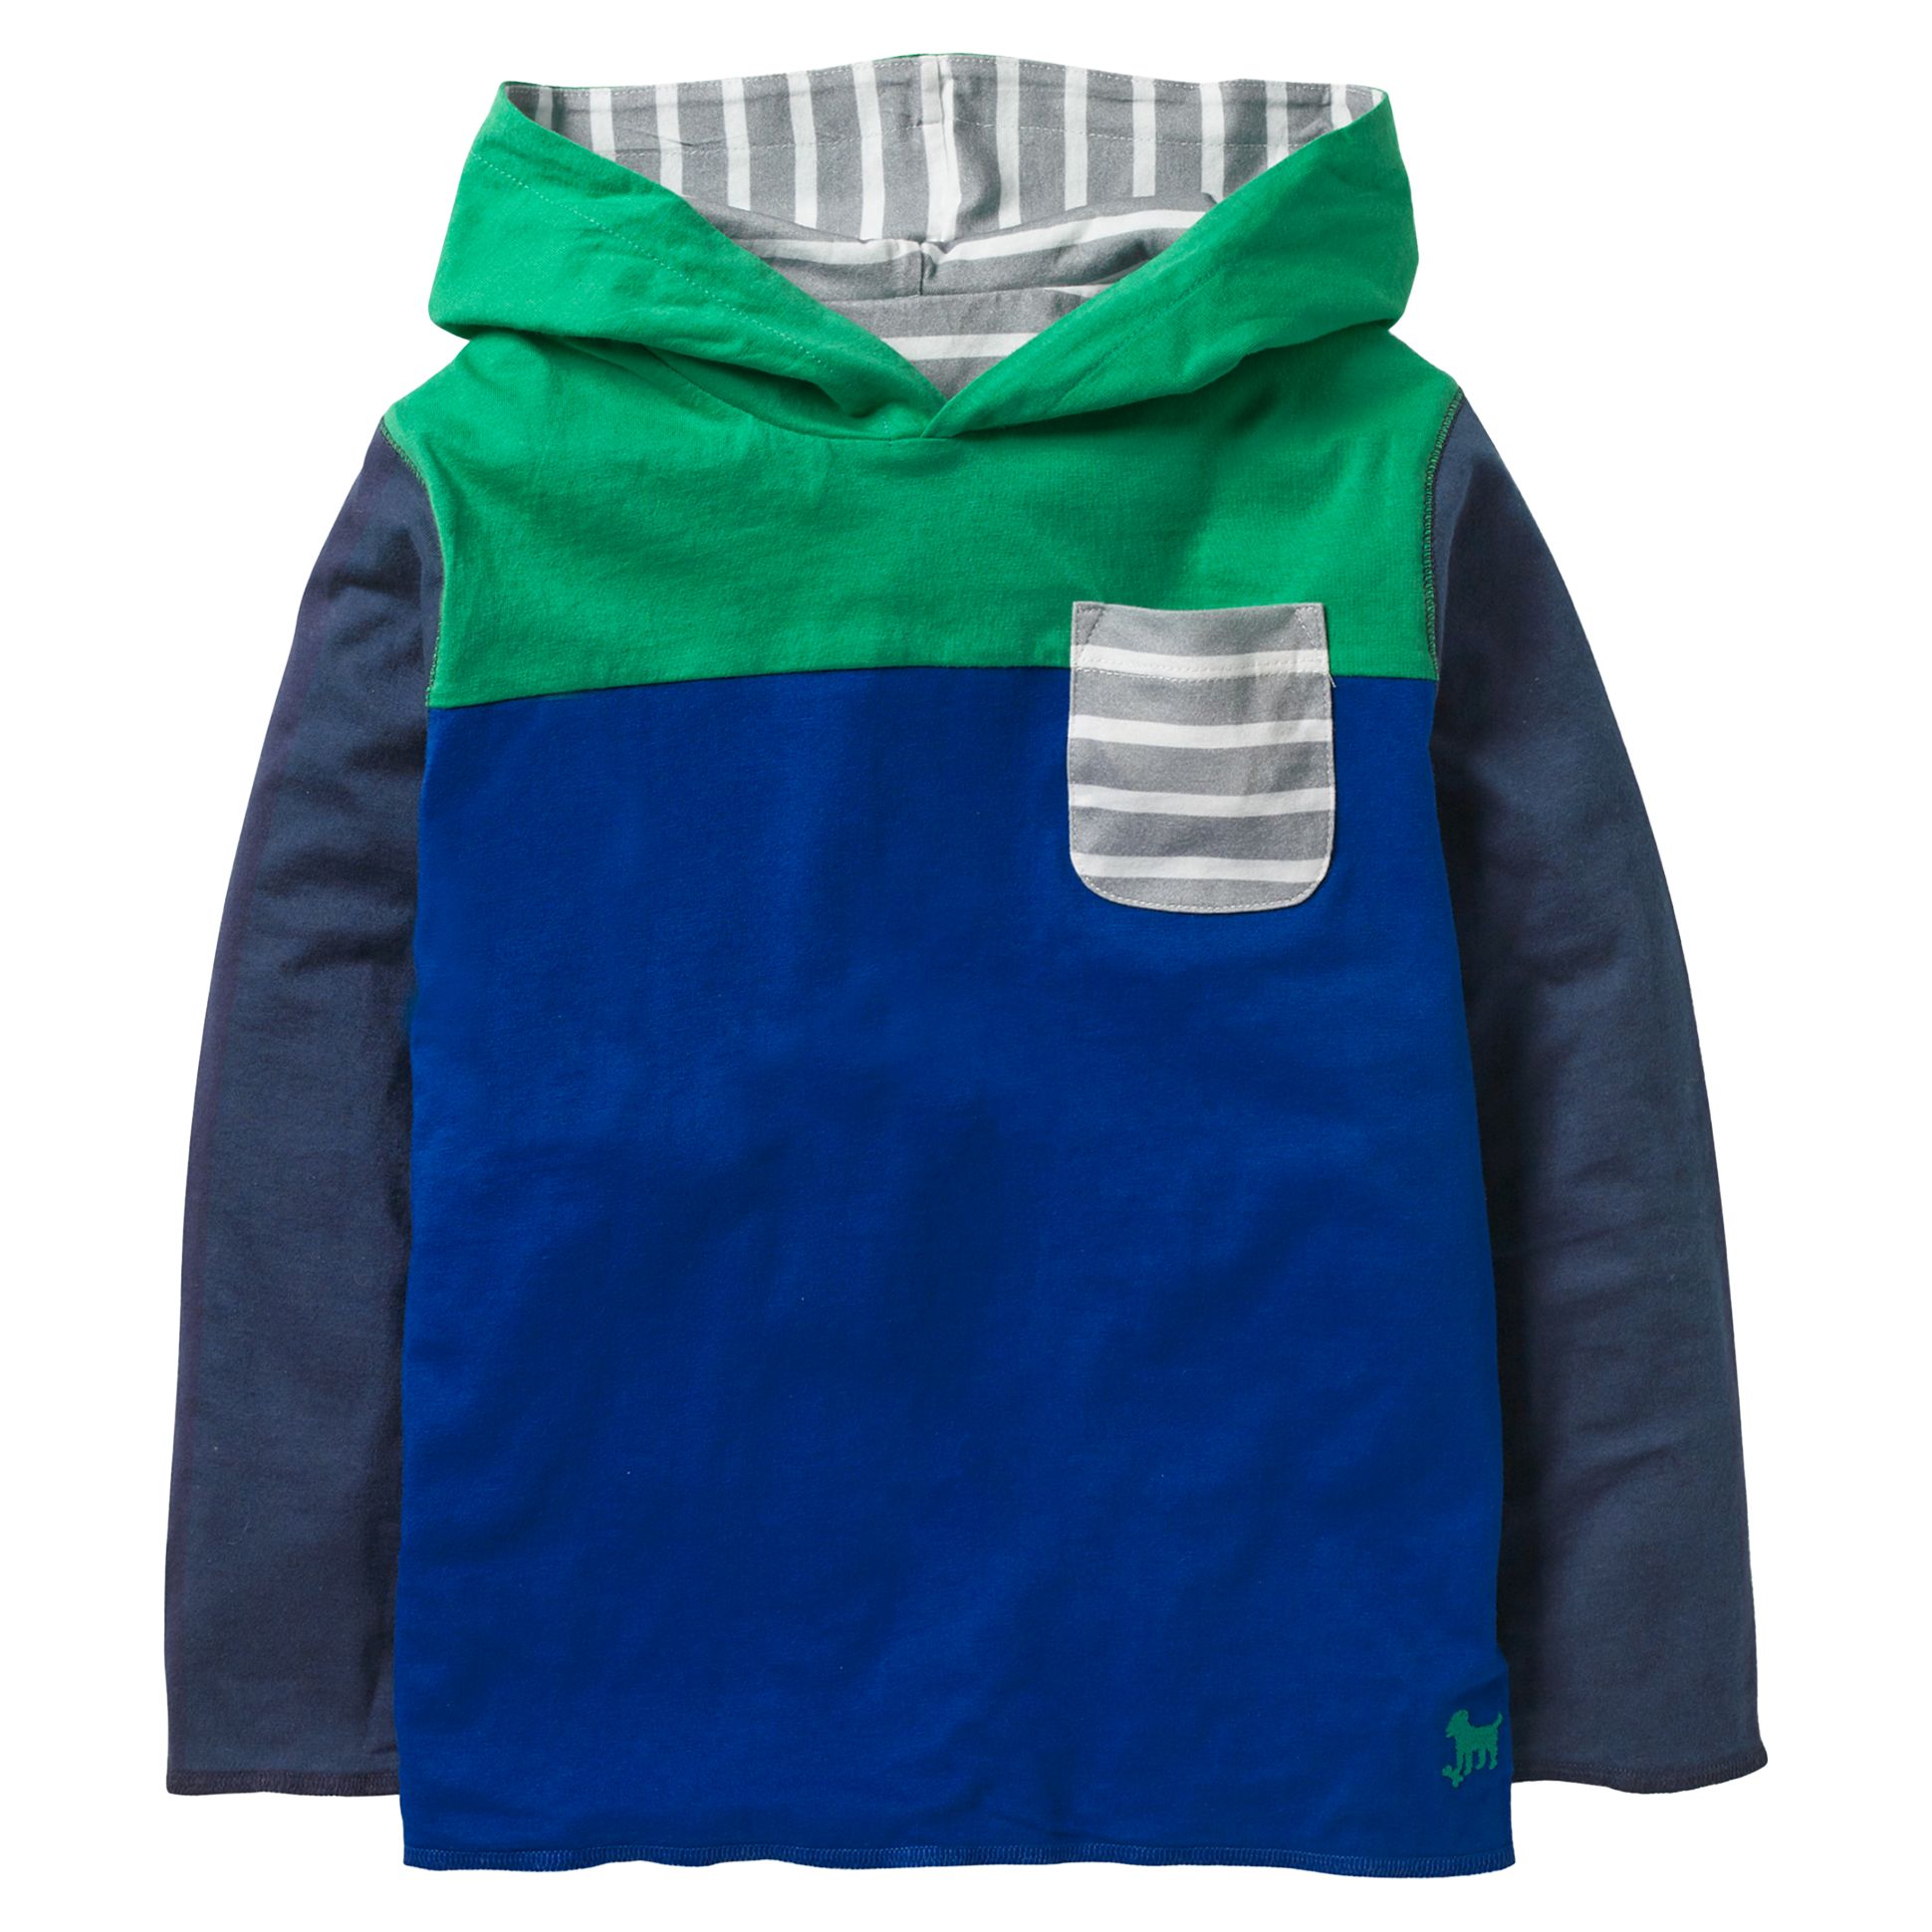 Mini Boden Boys' Reversible Hooded Top, Blue/Grey, 7-8 years